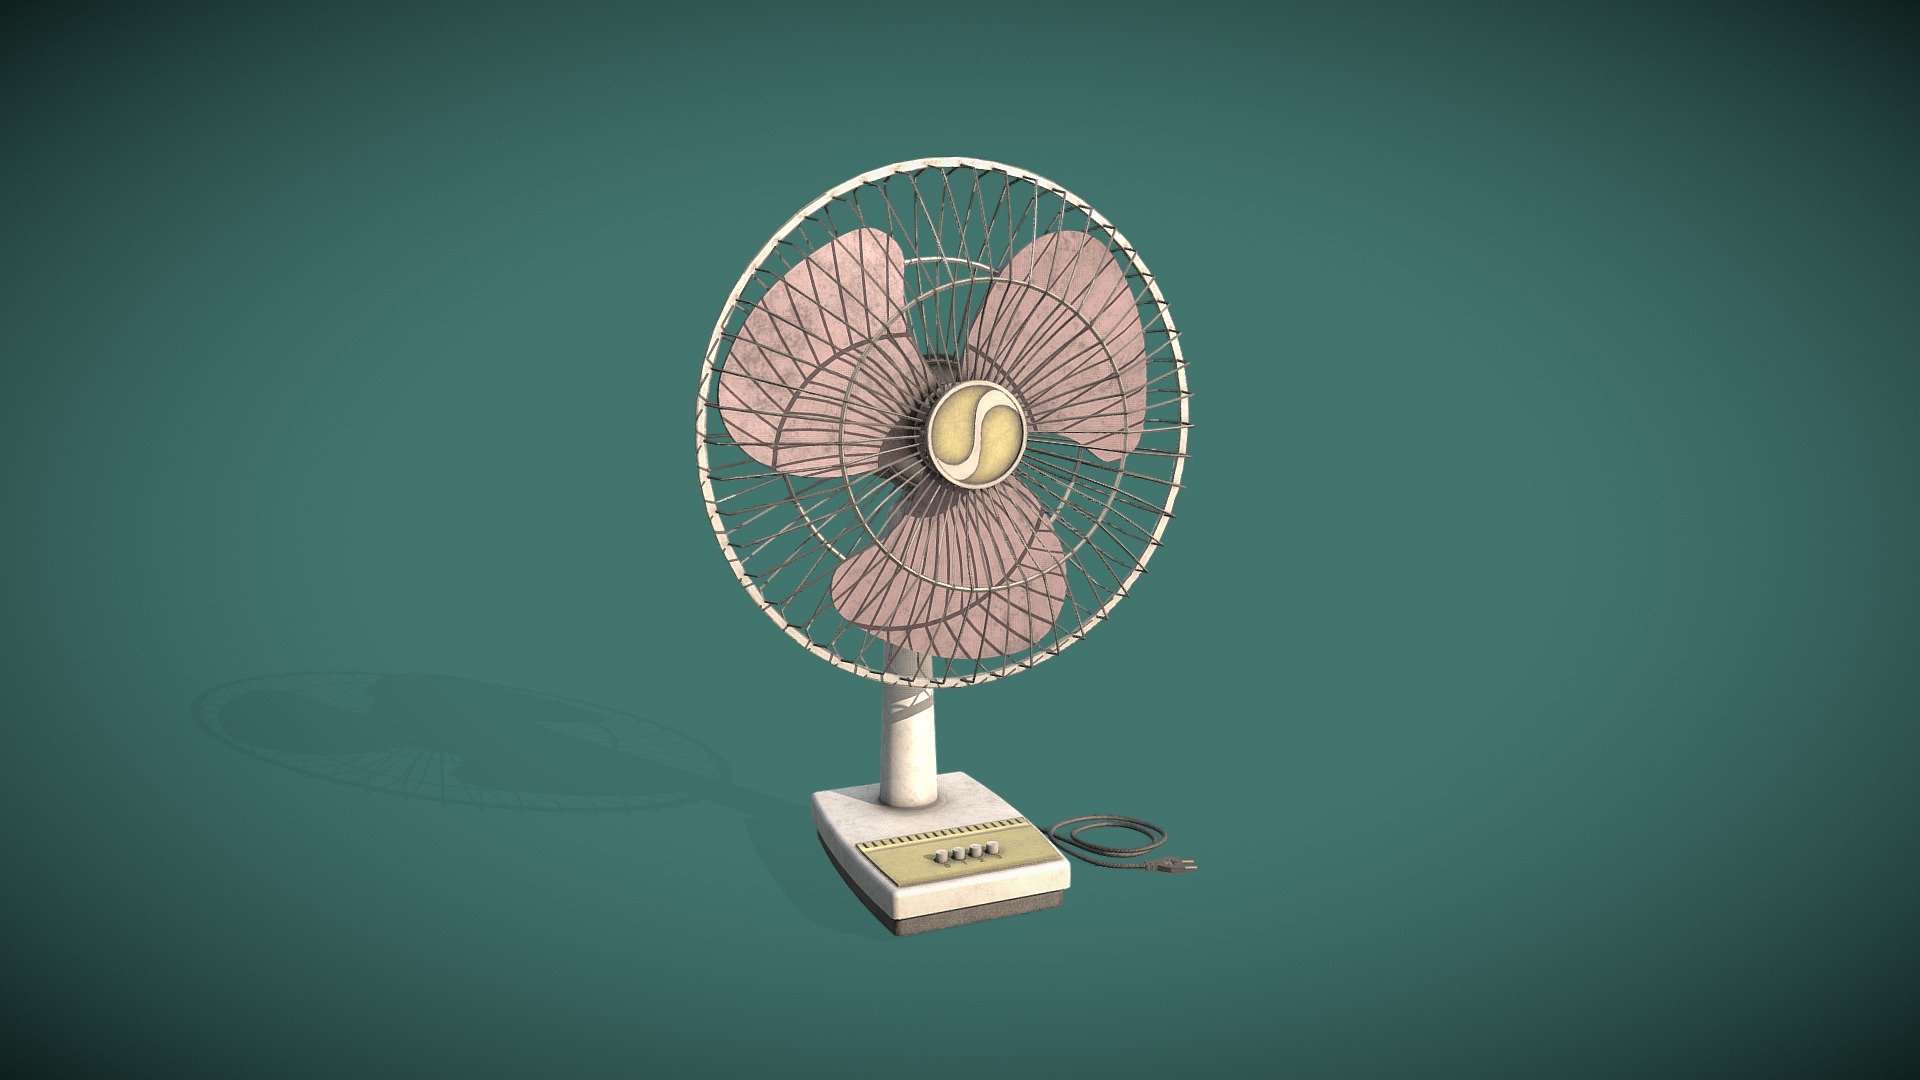 A very high quality, fully rigged Table Fan with two looks, One old look(with dirt and scratches) and other new look(without dirt and scratches).

The complete Table Fan is a single mesh with single material. The model is rigged in such way that the fan can be rotated, Fan's direction and angle can be changed and wire can be moved.

Poly-count is kept as low as possible. All textures are very high quality with 2K resolution. All polygons are quads and no tris or N-Gons are used in geometry during production.

Ready to be used in Virtual Reality (VR), Augmented Reality (AR), games and other real-time apps.




Key Features :



Available in 2 looks(New and Old) 

Minimum possible poly-counts 

1 Mesh, 1 Material 

Fully Rigged 

Real world scale 

Only Quads(No tris or N-Gons) 

Non-overlapping Unwrapped UVs 

High quality 2K resolution textures




Textures :



Base Color 

Metallic Map 

Roughness Map 

Specular Map 

AO Map 

Normal Map
 - Table Fan - Buy Royalty Free 3D model by Game Art Universe (@gameartuniverse) 3d model